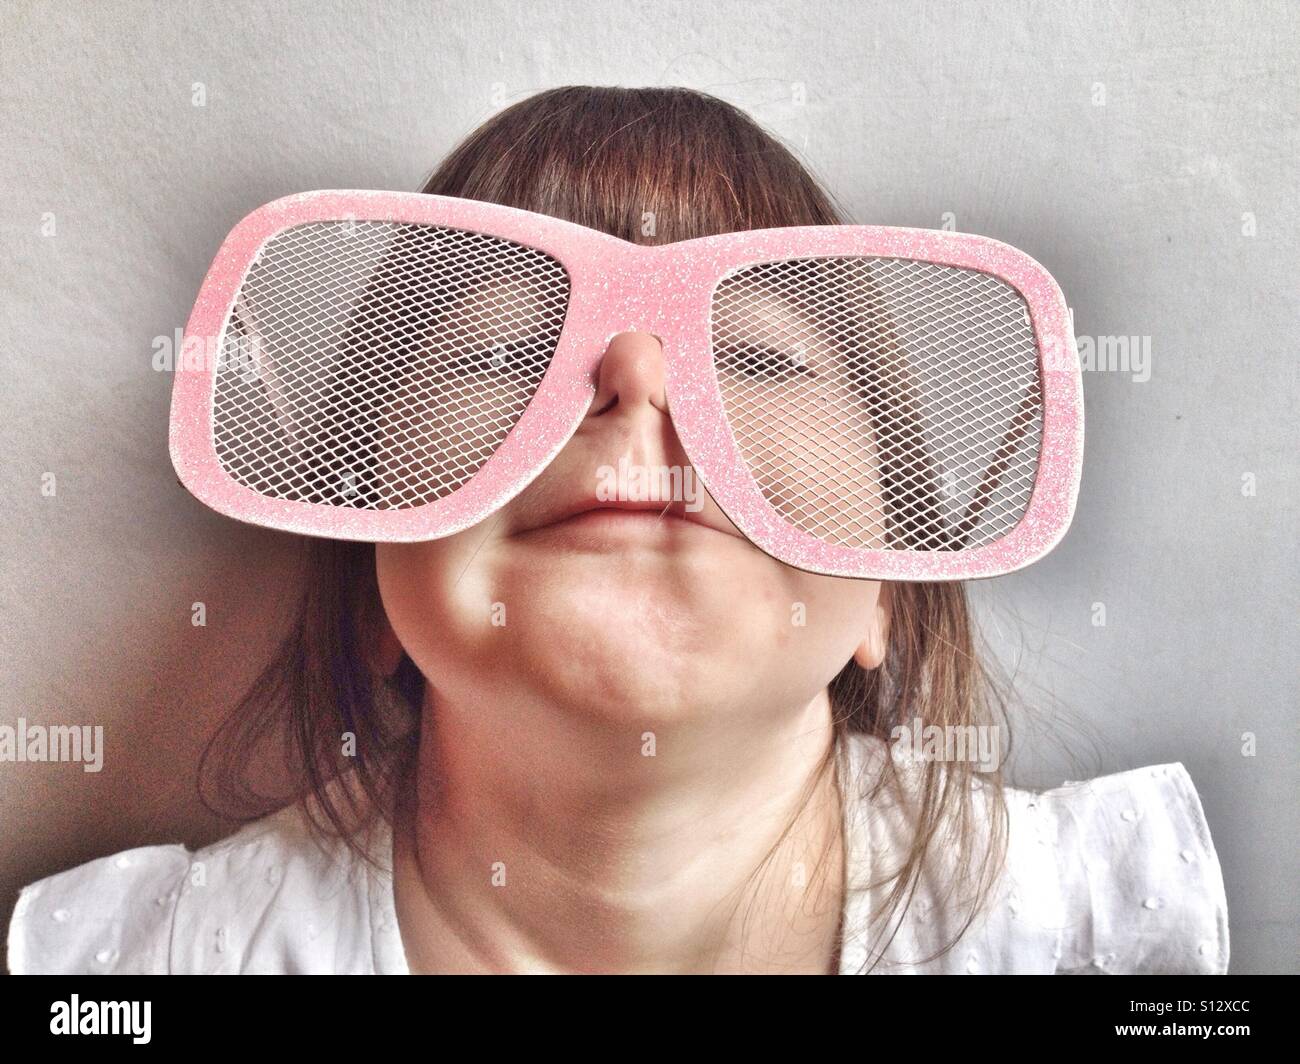 Young girl wearing oversized comedy glasses Stock Photo